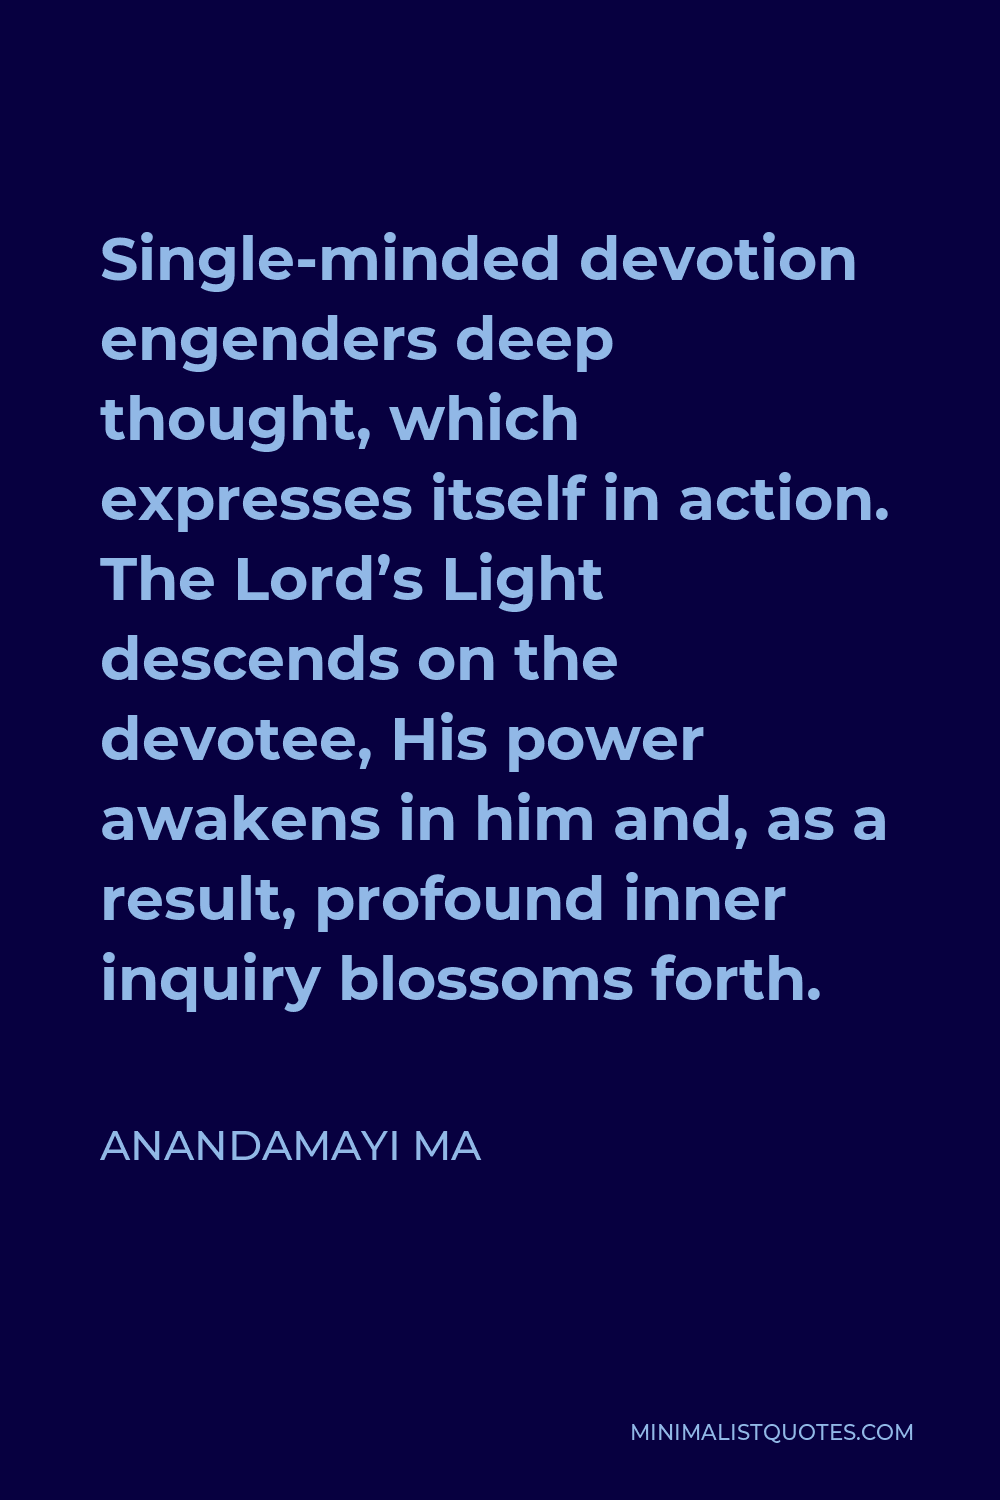 Anandamayi Ma Quote - Single-minded devotion engenders deep thought, which expresses itself in action. The Lord’s Light descends on the devotee, His power awakens in him and, as a result, profound inner inquiry blossoms forth.